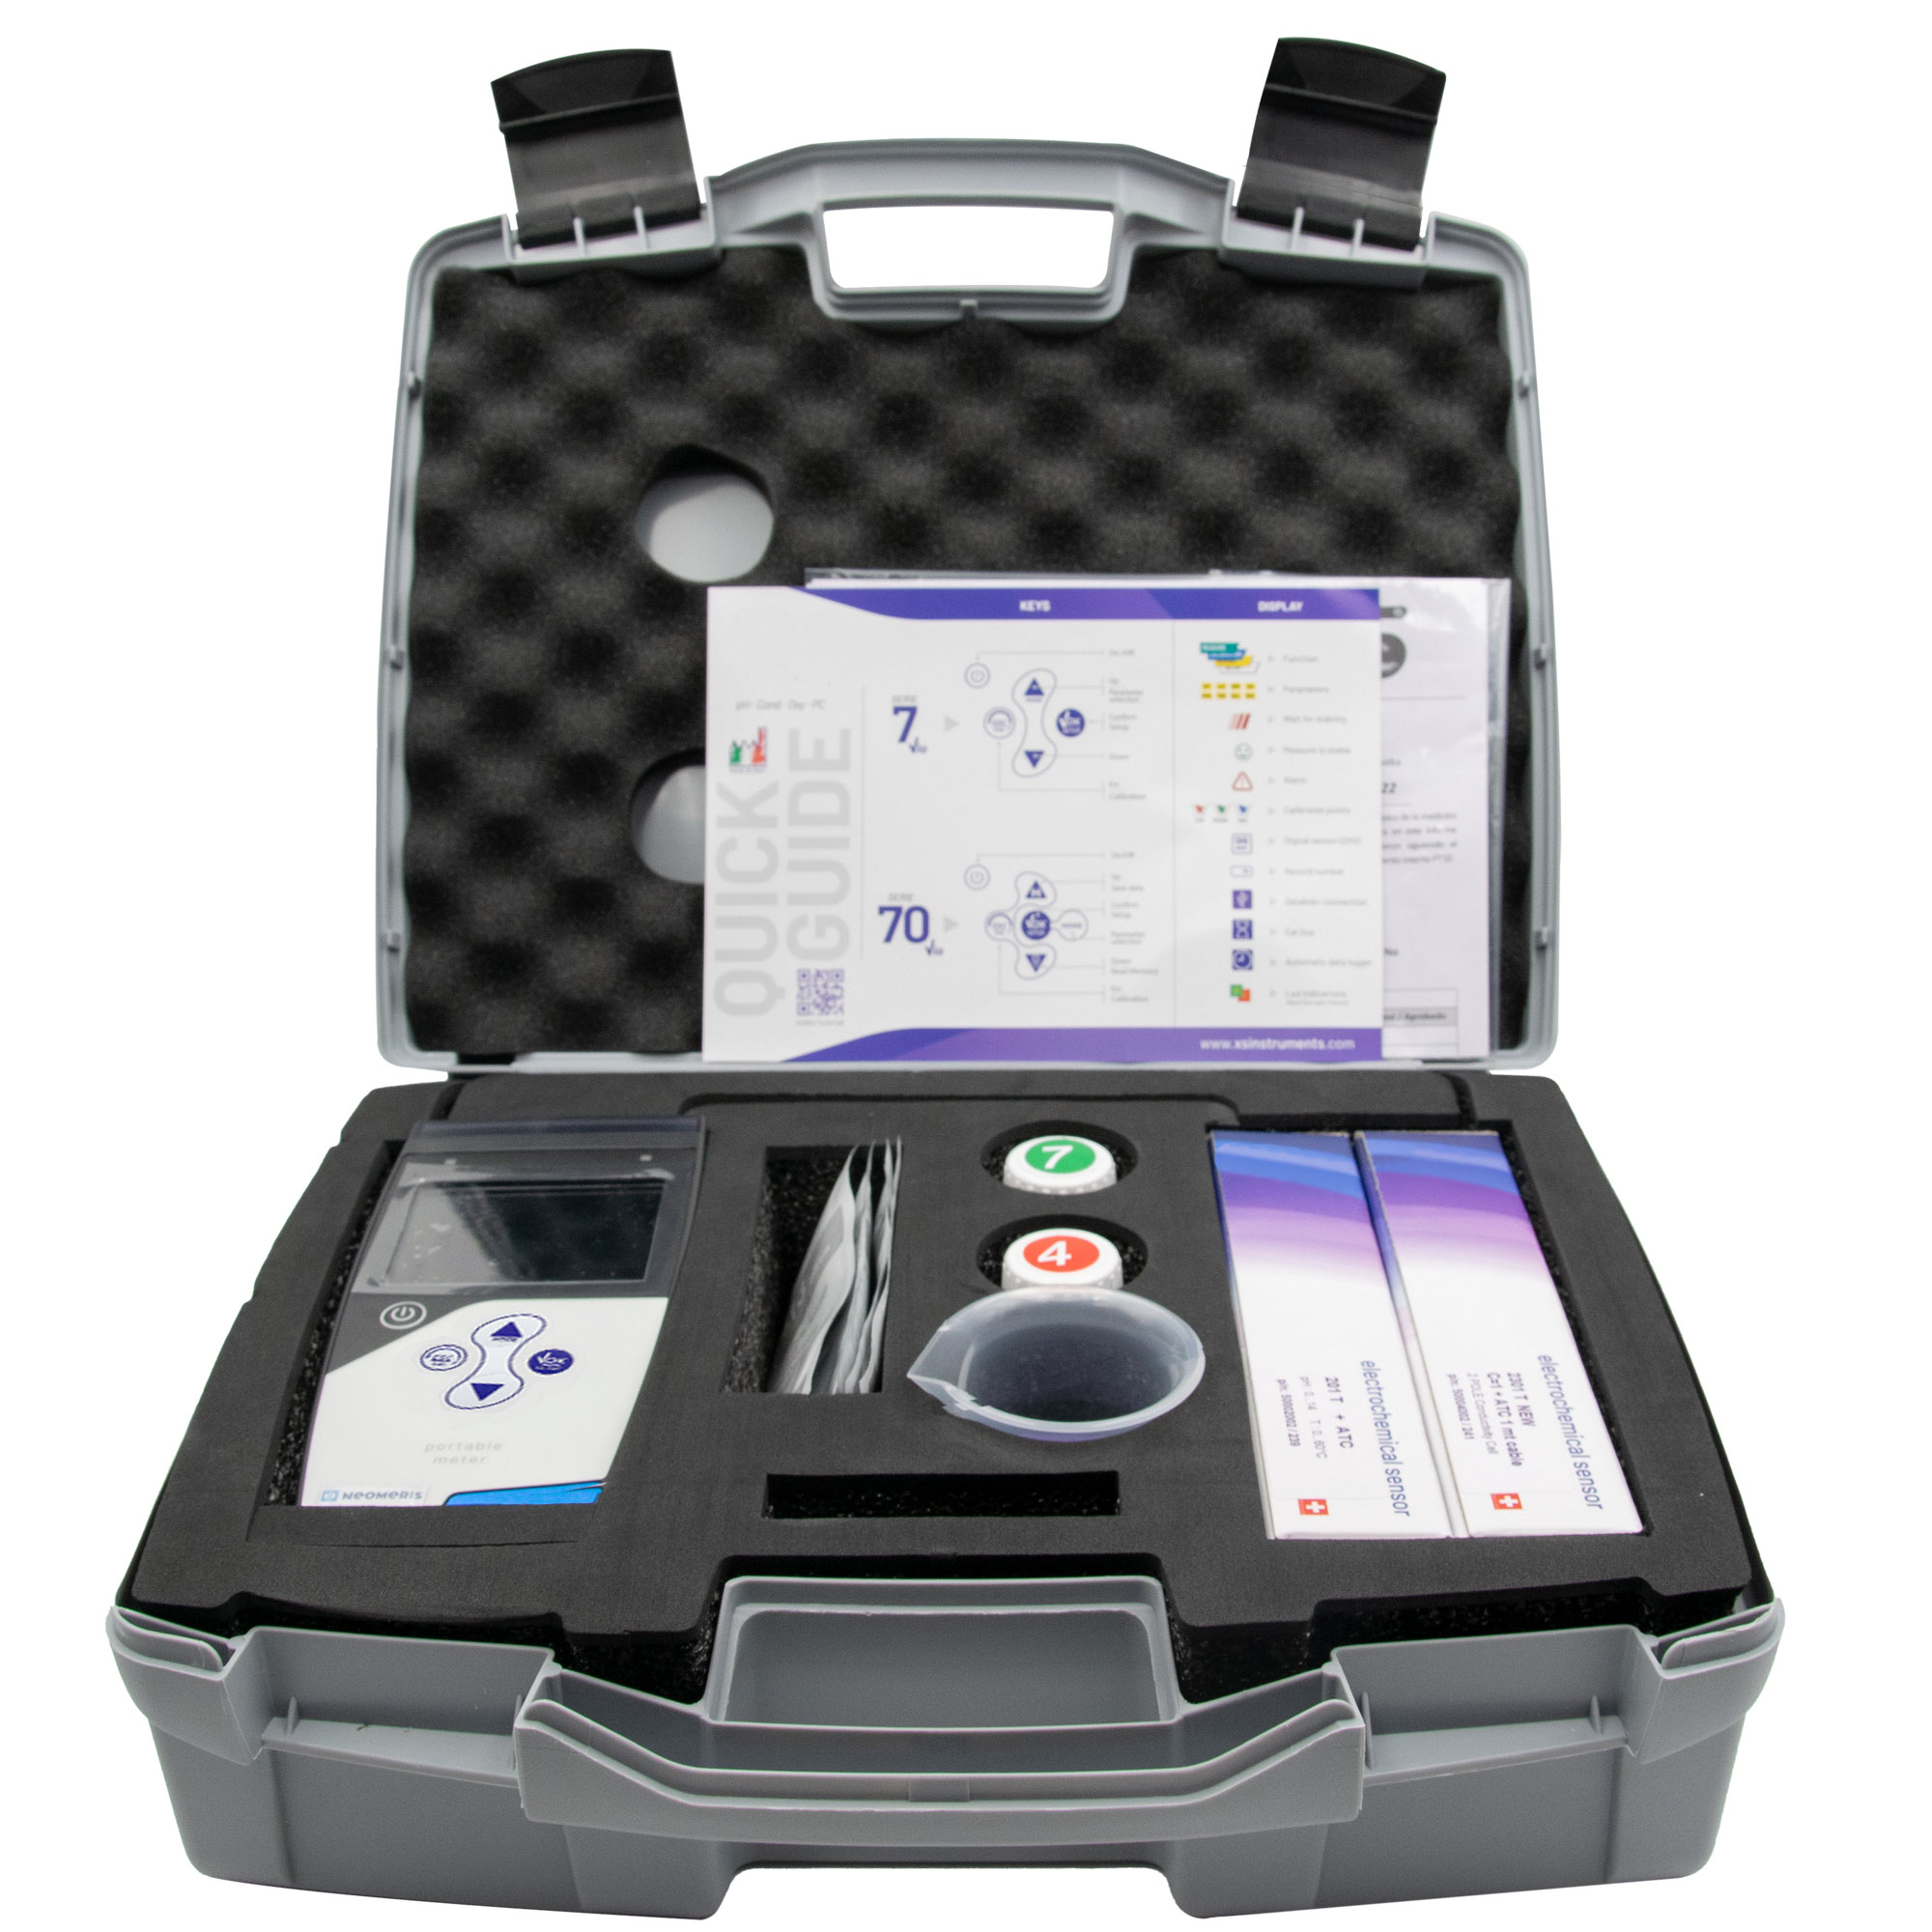 Professional pH/conductivity/TDS/mV/ORP/Temperature handheld meter in carrying case including electrodes